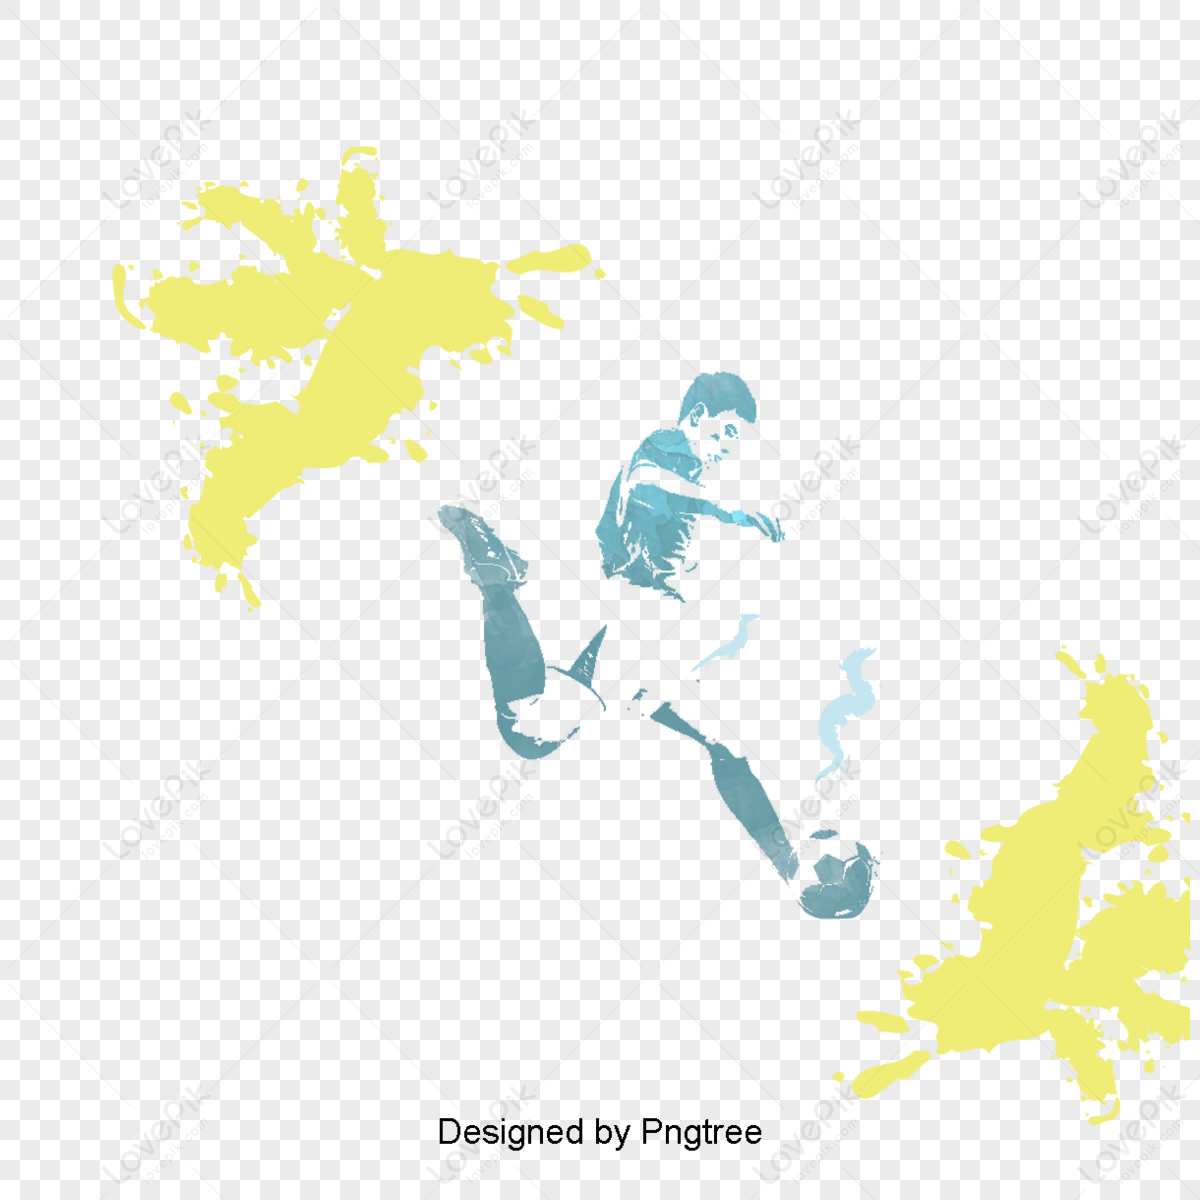 One line drawing of football player kick a ball Vector Image